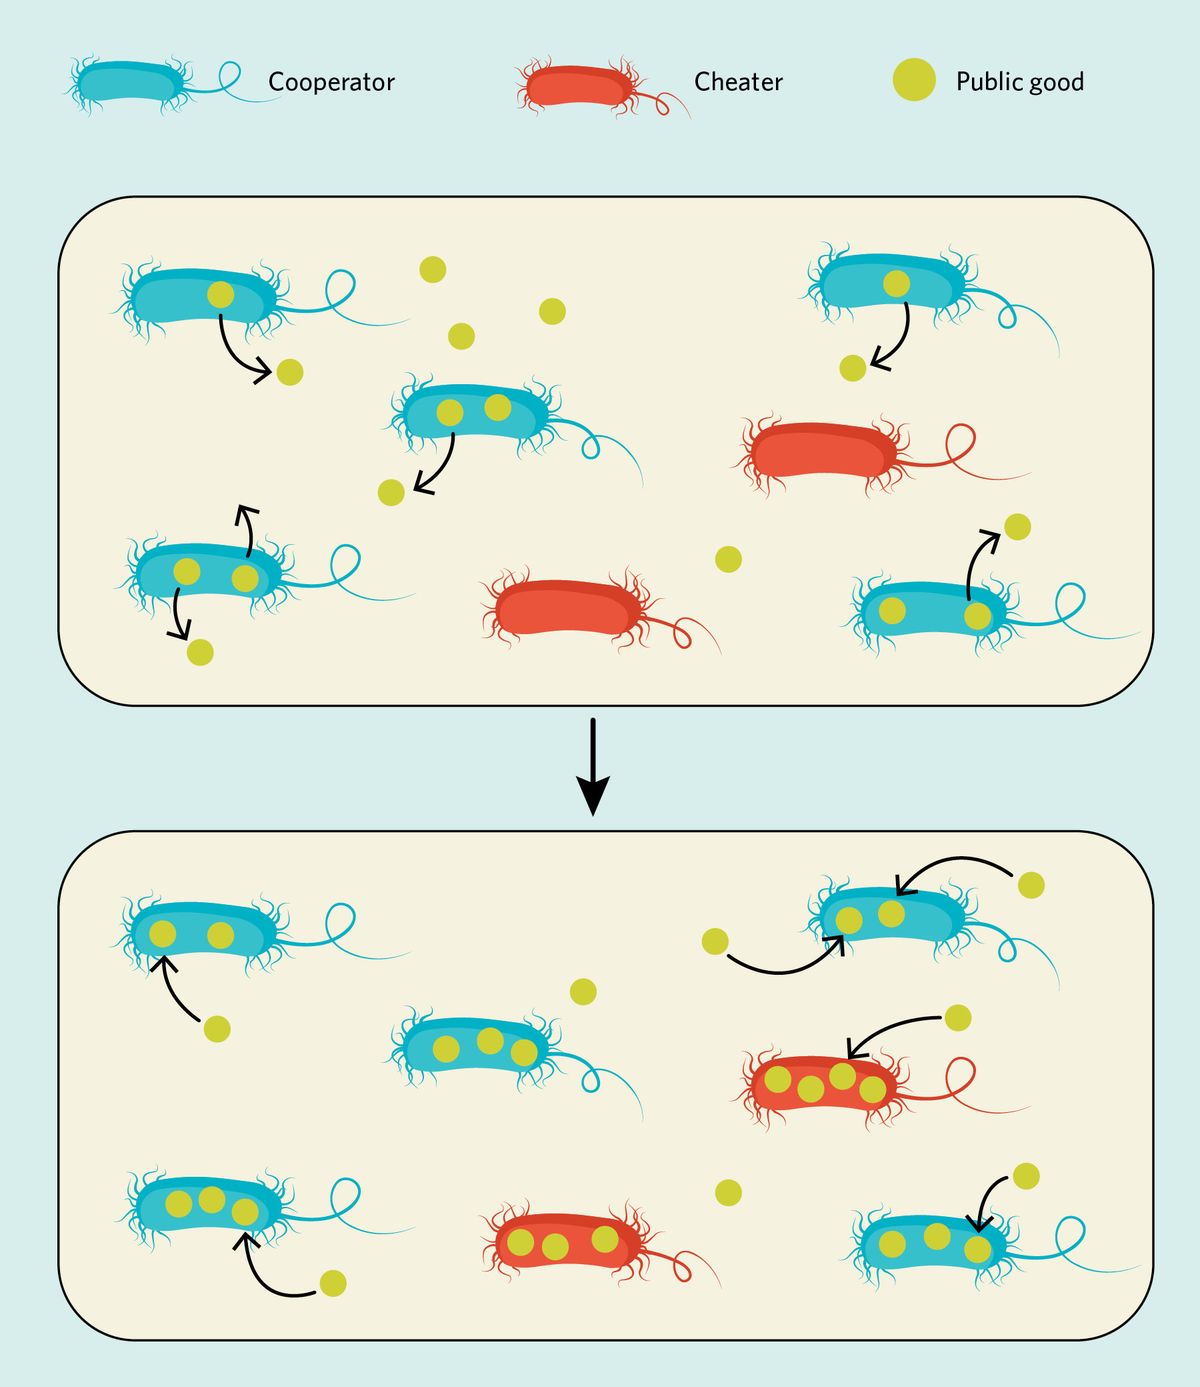 Infographic showing how bacterial cheaters benefit from cooperators in bacterial communities